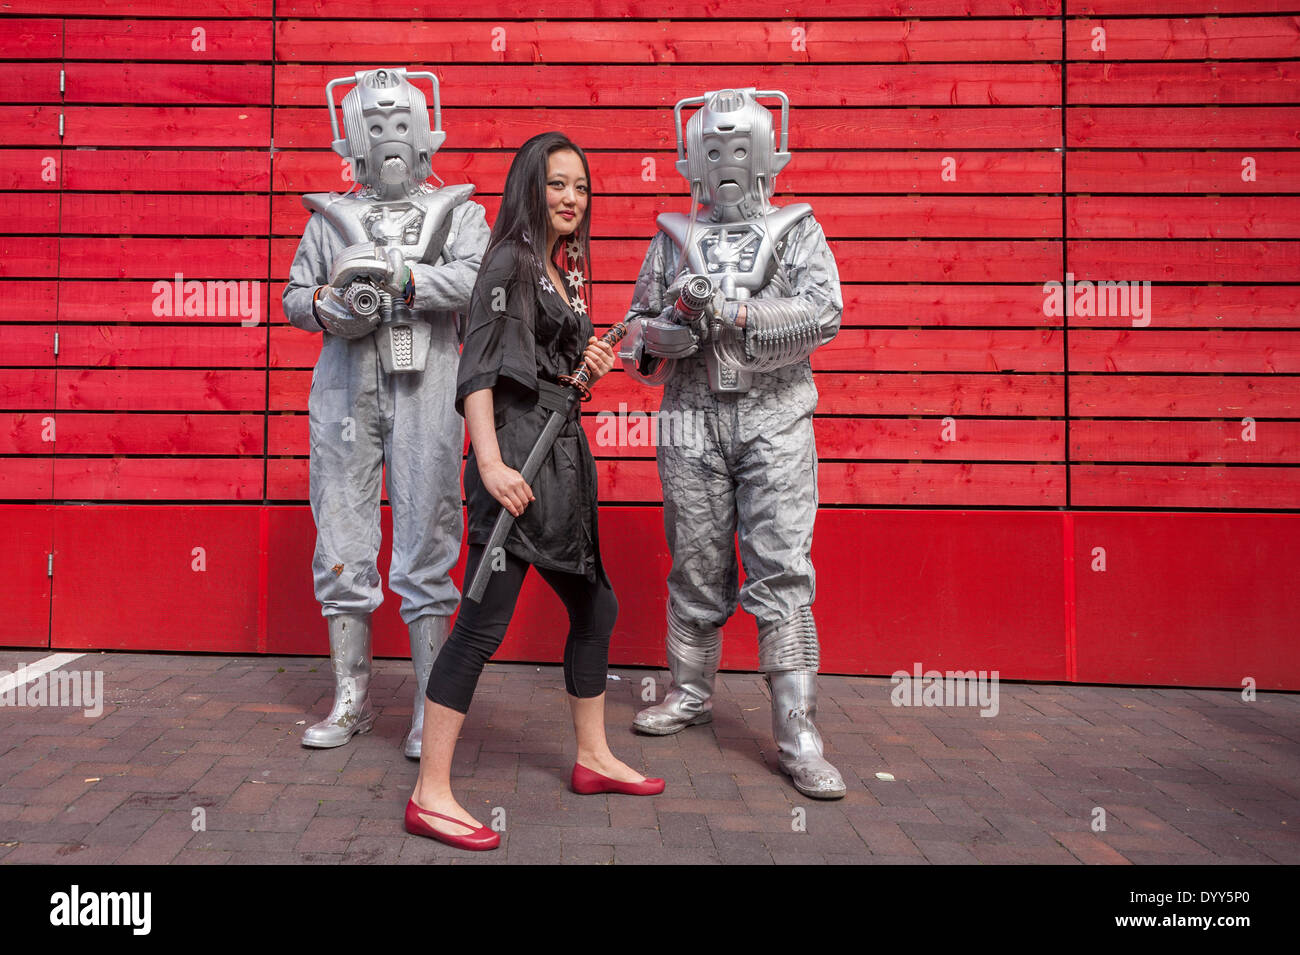 London, 27 April 2014 - people dressed as their favourite sci-fi characters take part in the Sci-Fi London 2014 costume parade starting at Somerset House and finishing at the BFI on the South Bank.  Two Cybermen and a girl dressed as a Japanese manga character.    Credit:  Stephen Chung/Alamy Live News Stock Photo